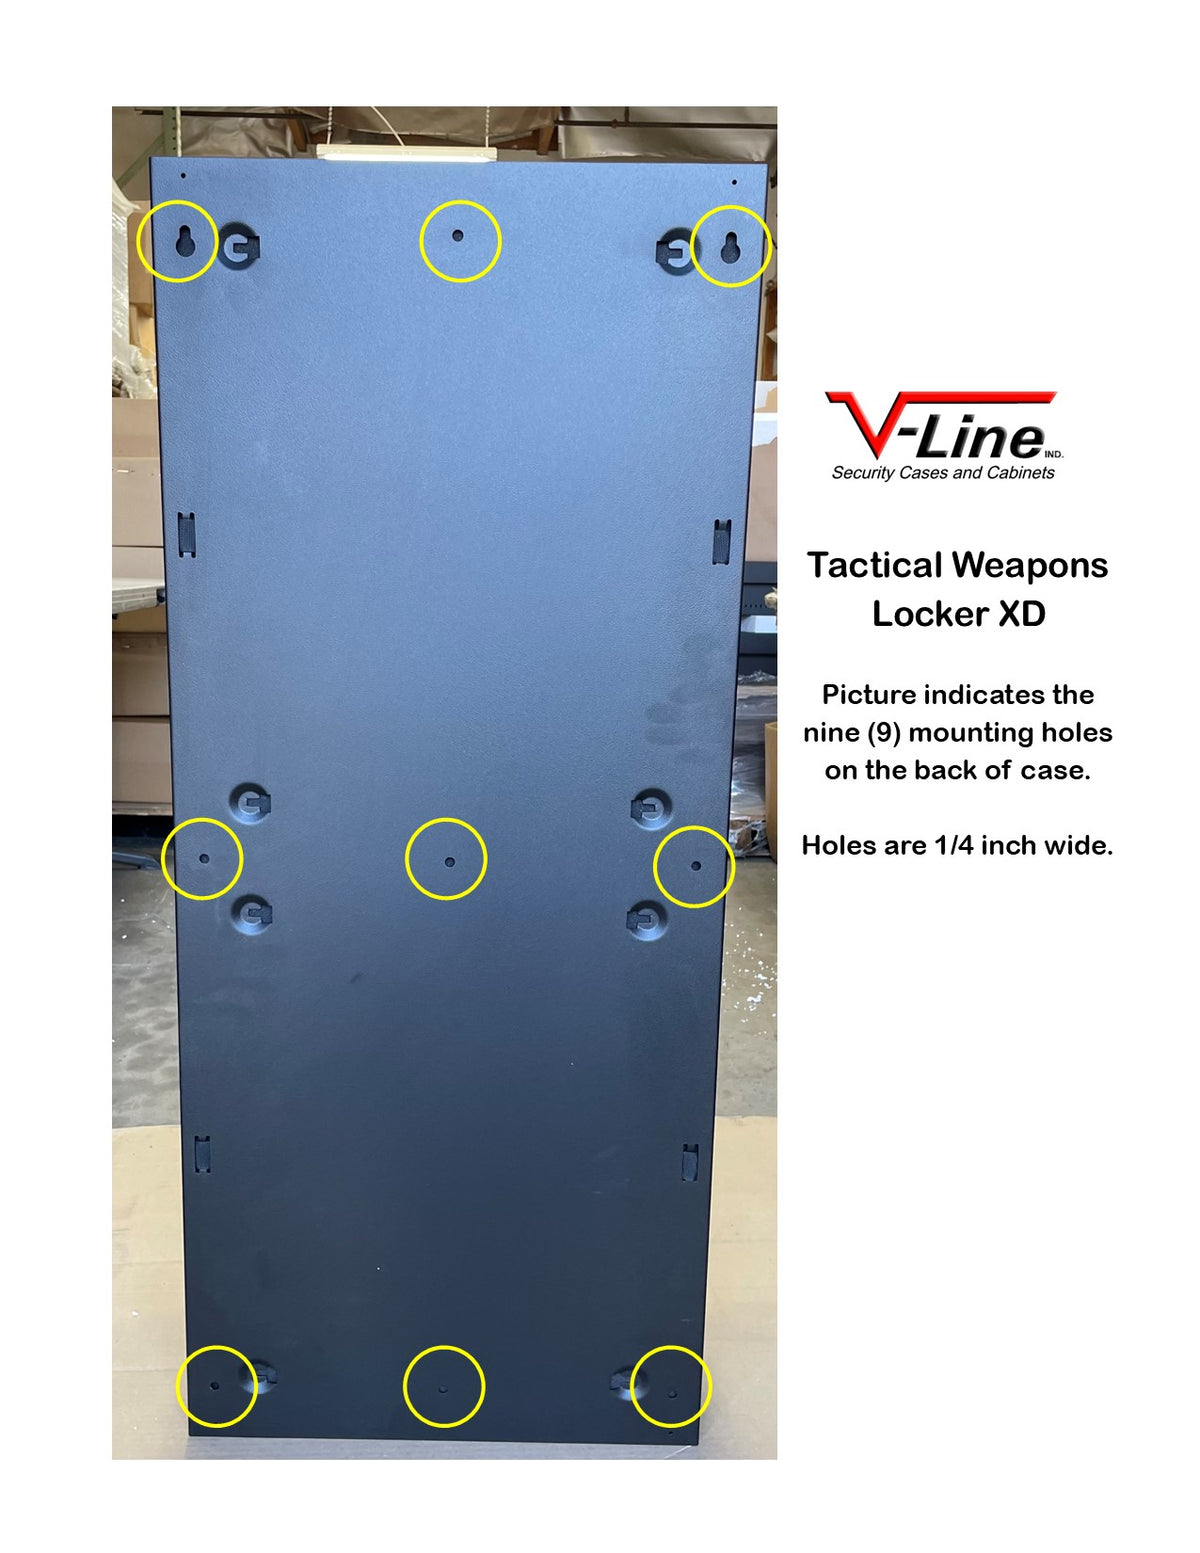 V-Line Tactical Weapons Locker XD Hole Pattern